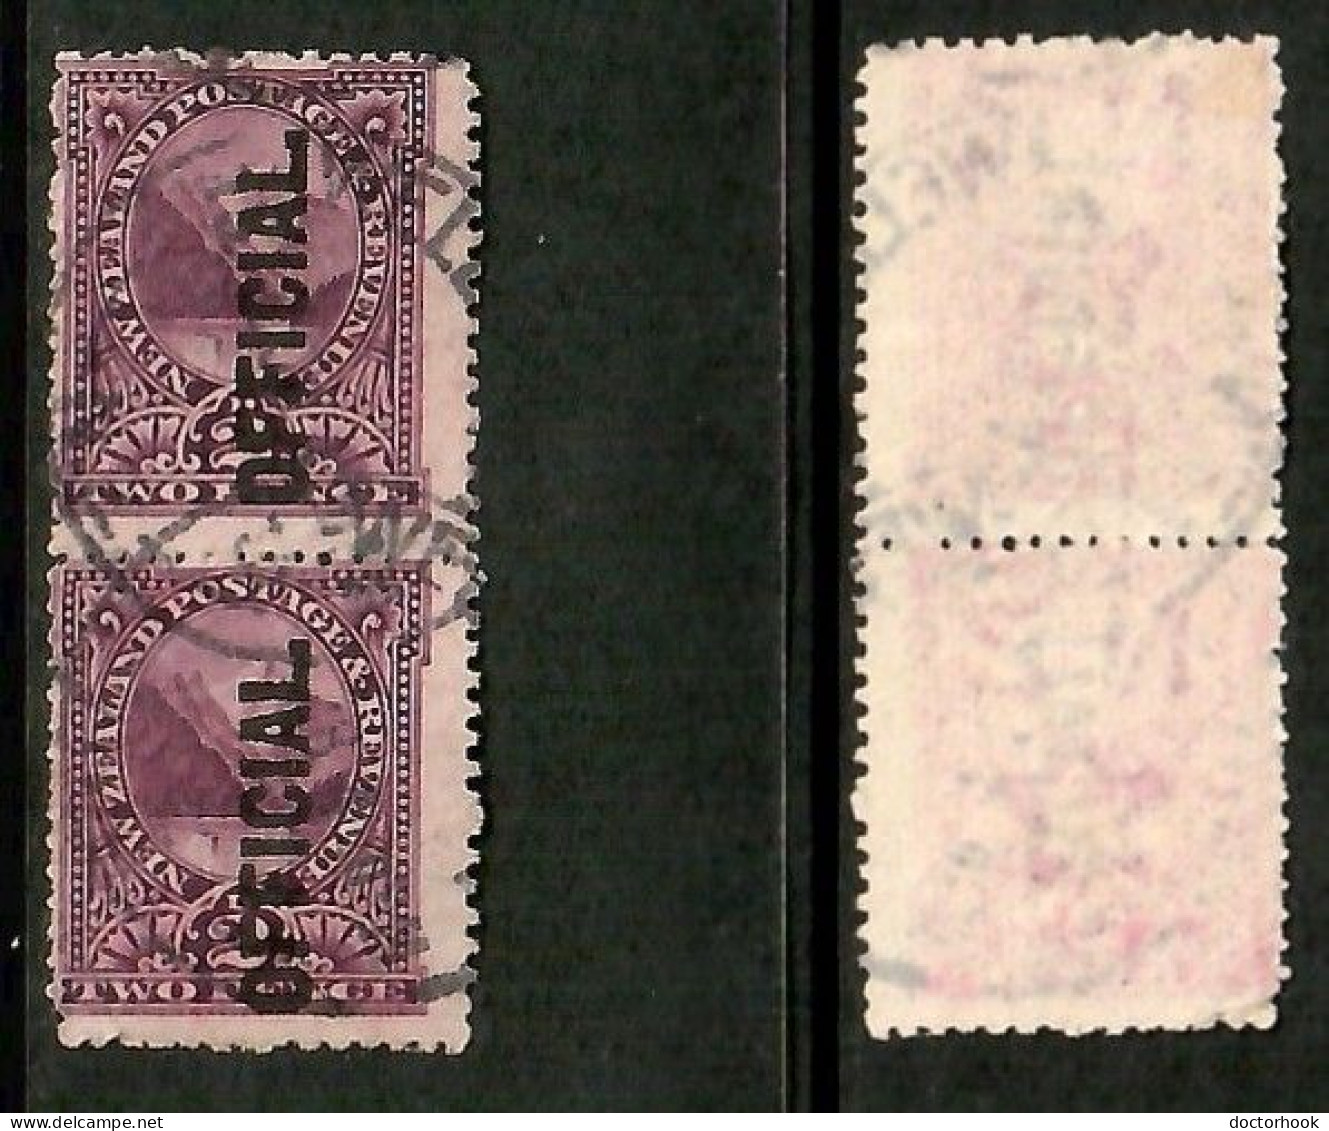 NEW ZEALAND    Scott # O 26 USED PAIR (CONDITION PER SCAN) (Stamp Scan # 1042-5) - Officials